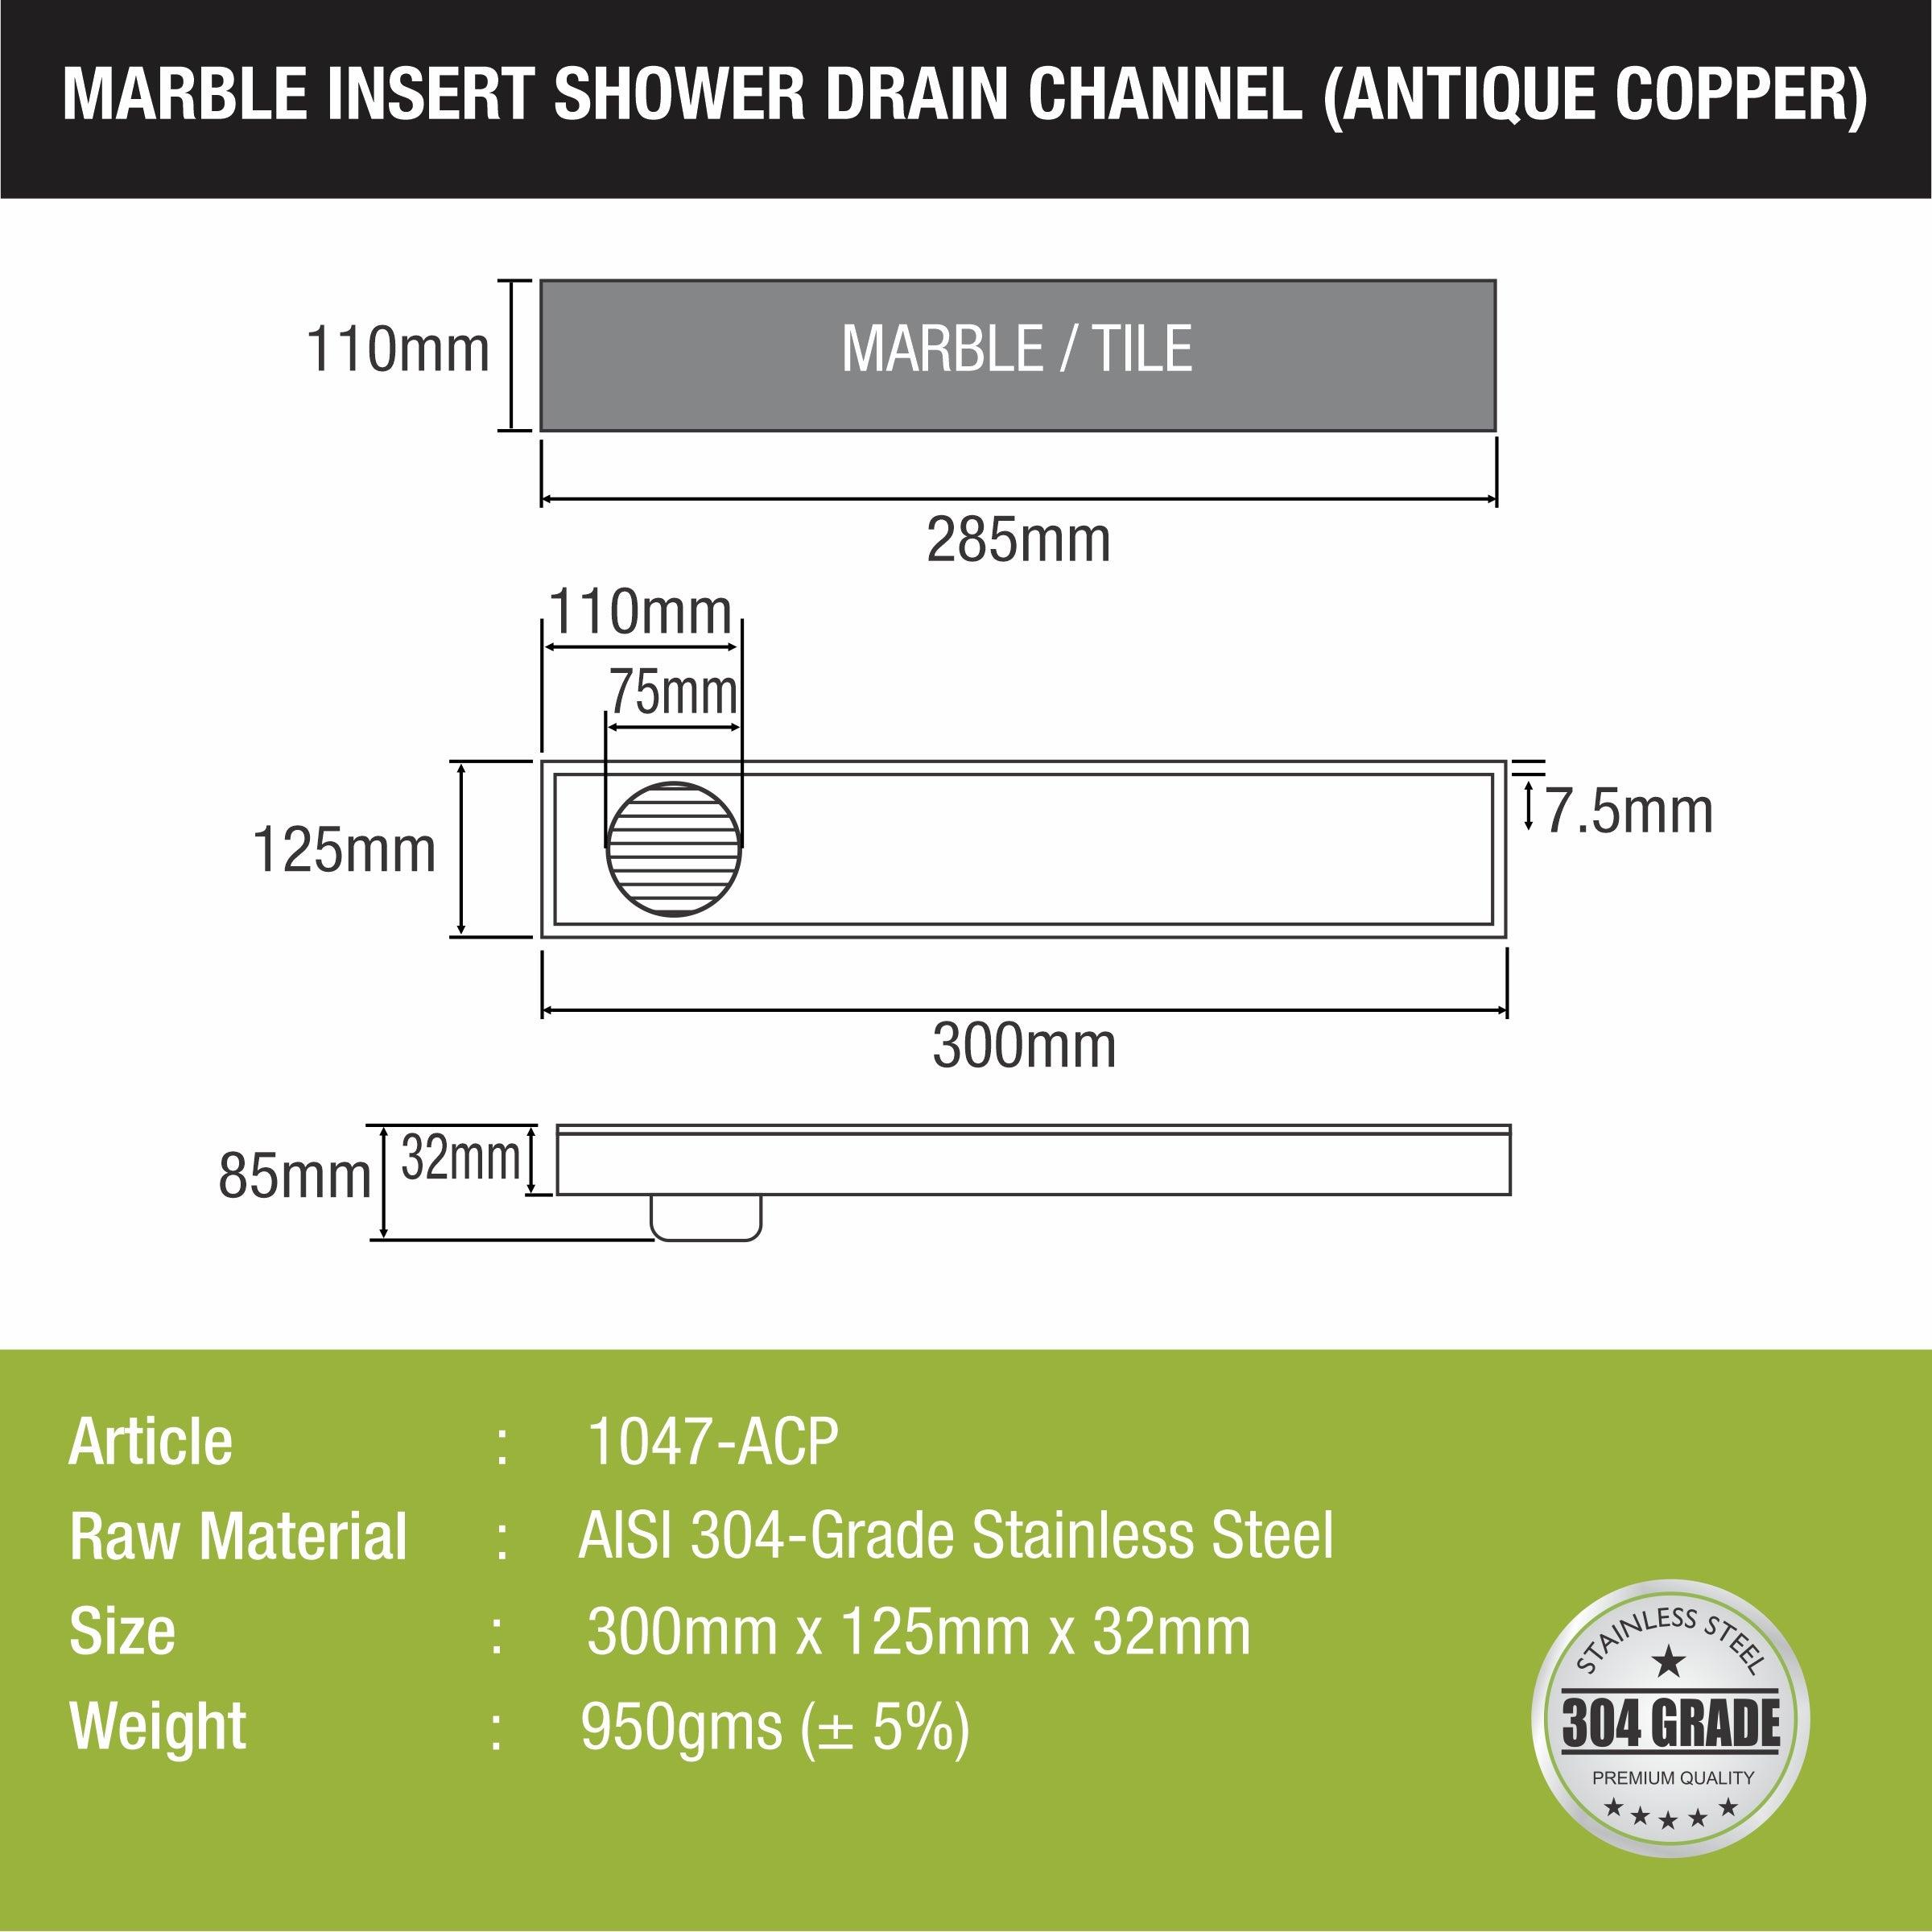 Marble Insert Shower Drain Channel - Antique Copper (12 x 5 Inches) sizes and dimensions